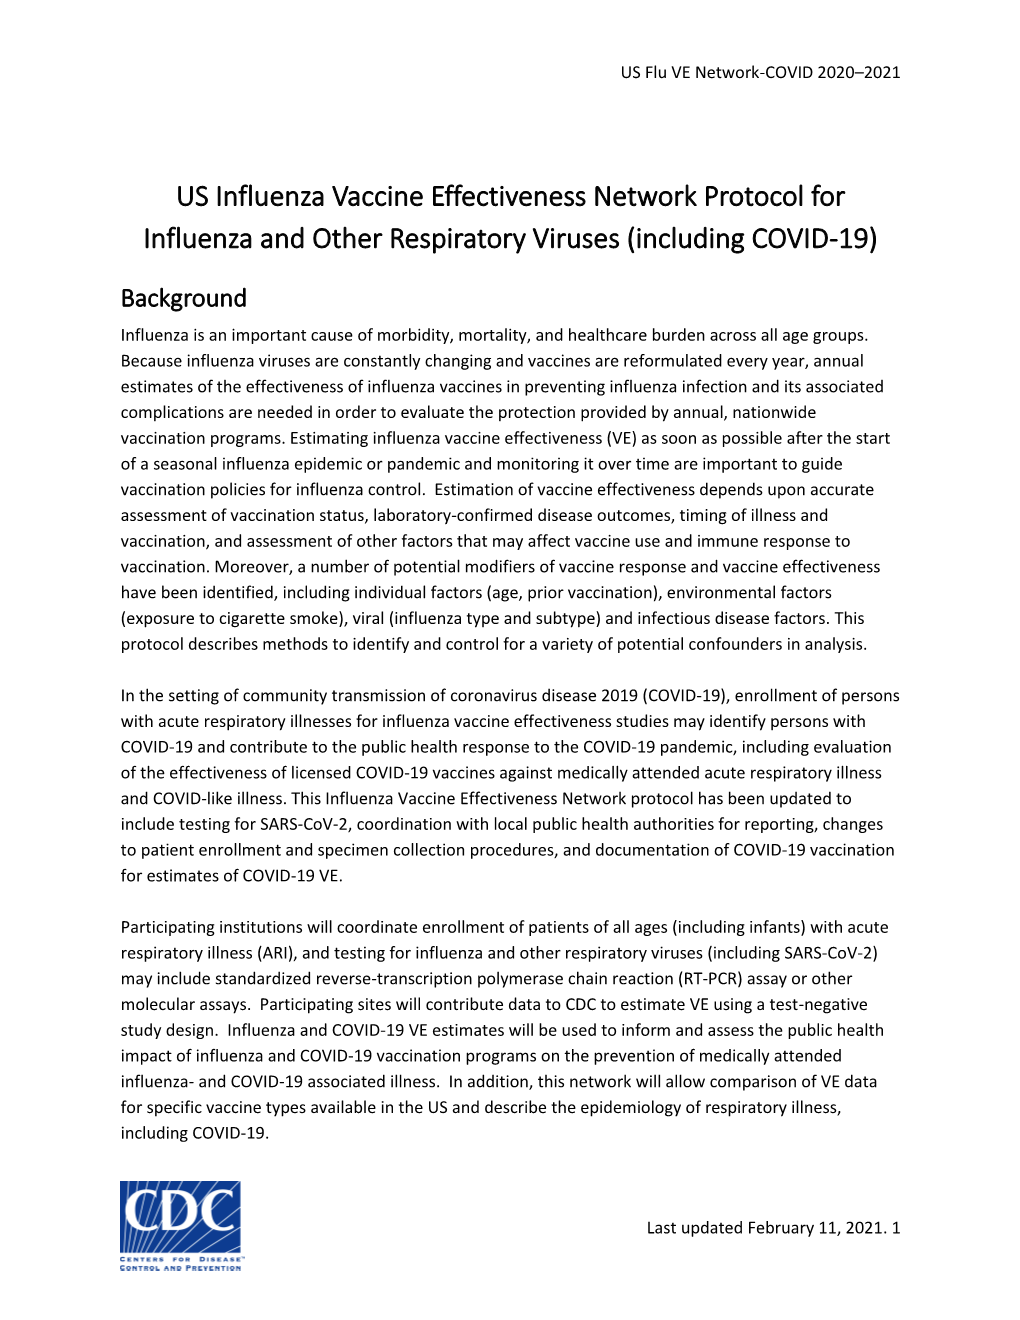 US Influenza Vaccine Effectiveness Network Protocol for Influenza and Other Respiratory Viruses (Including COVID-19)